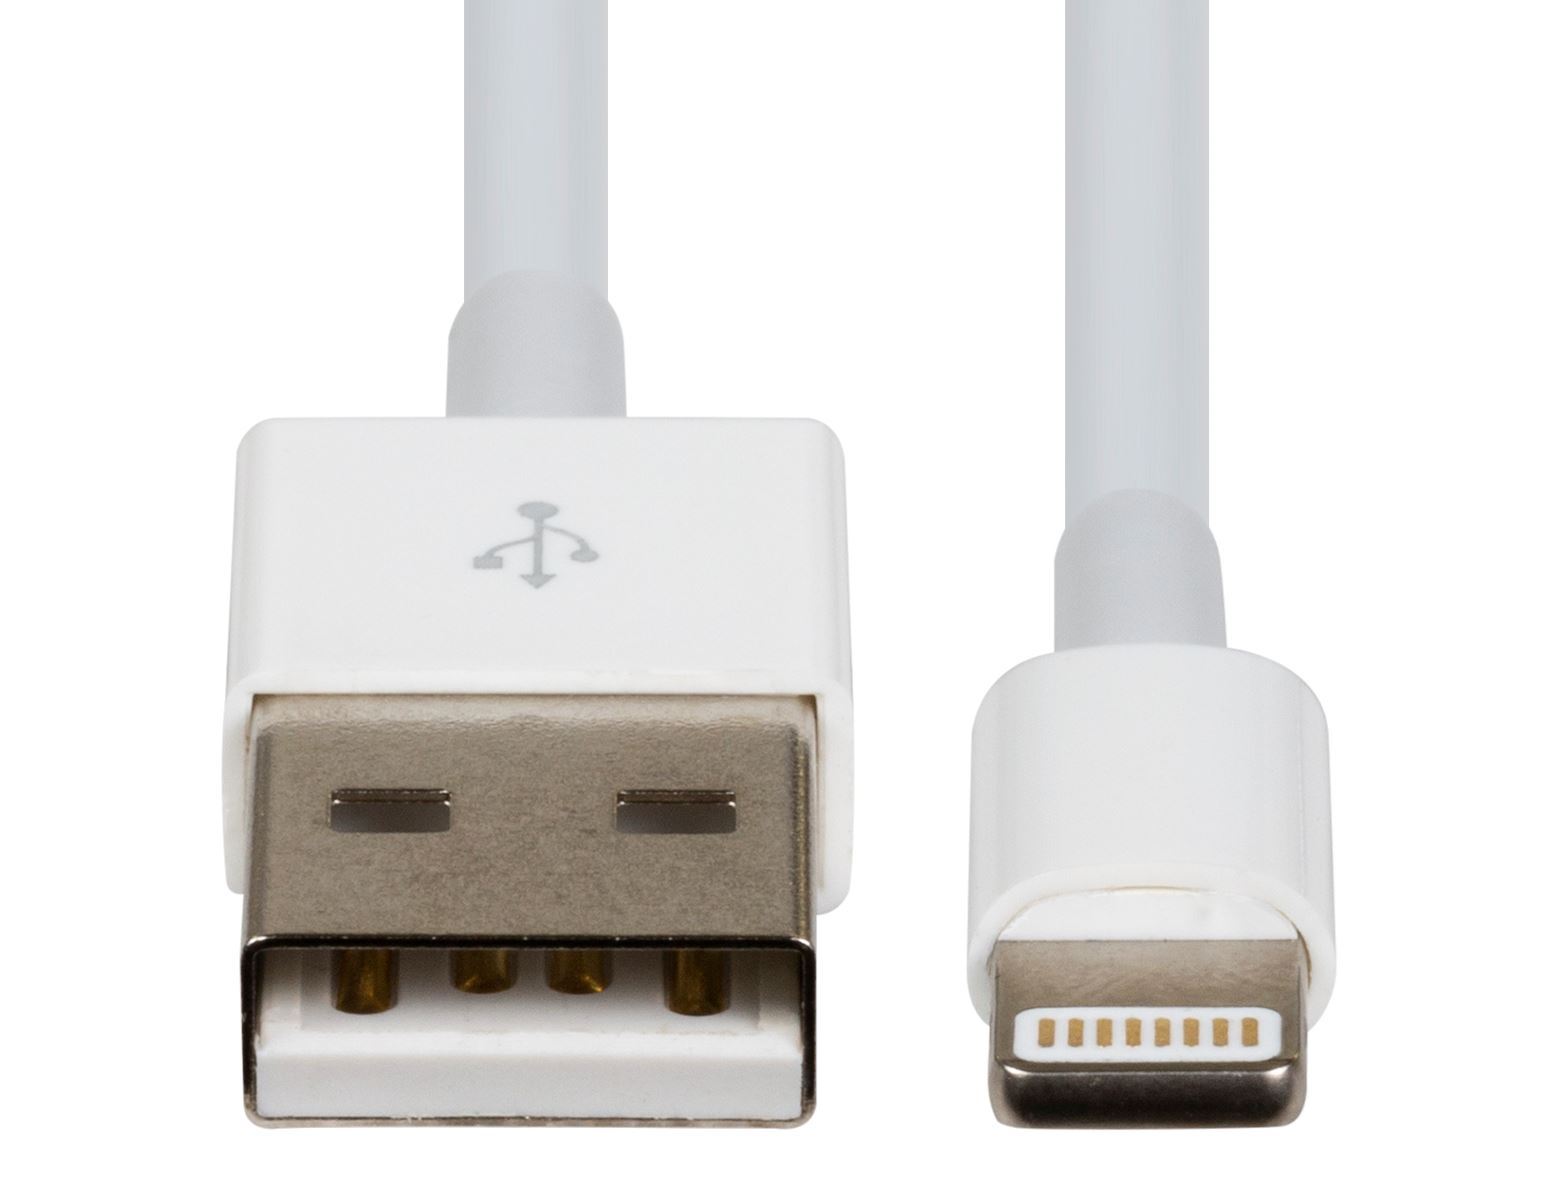 DYNAMIX_180mm_USB-A_to_Lightning_Charge_&_Sync_Cable._For_Apple_iPhone,_iPad,_iPad_mini_&_iPods_*Not_MFI_Certified* 923